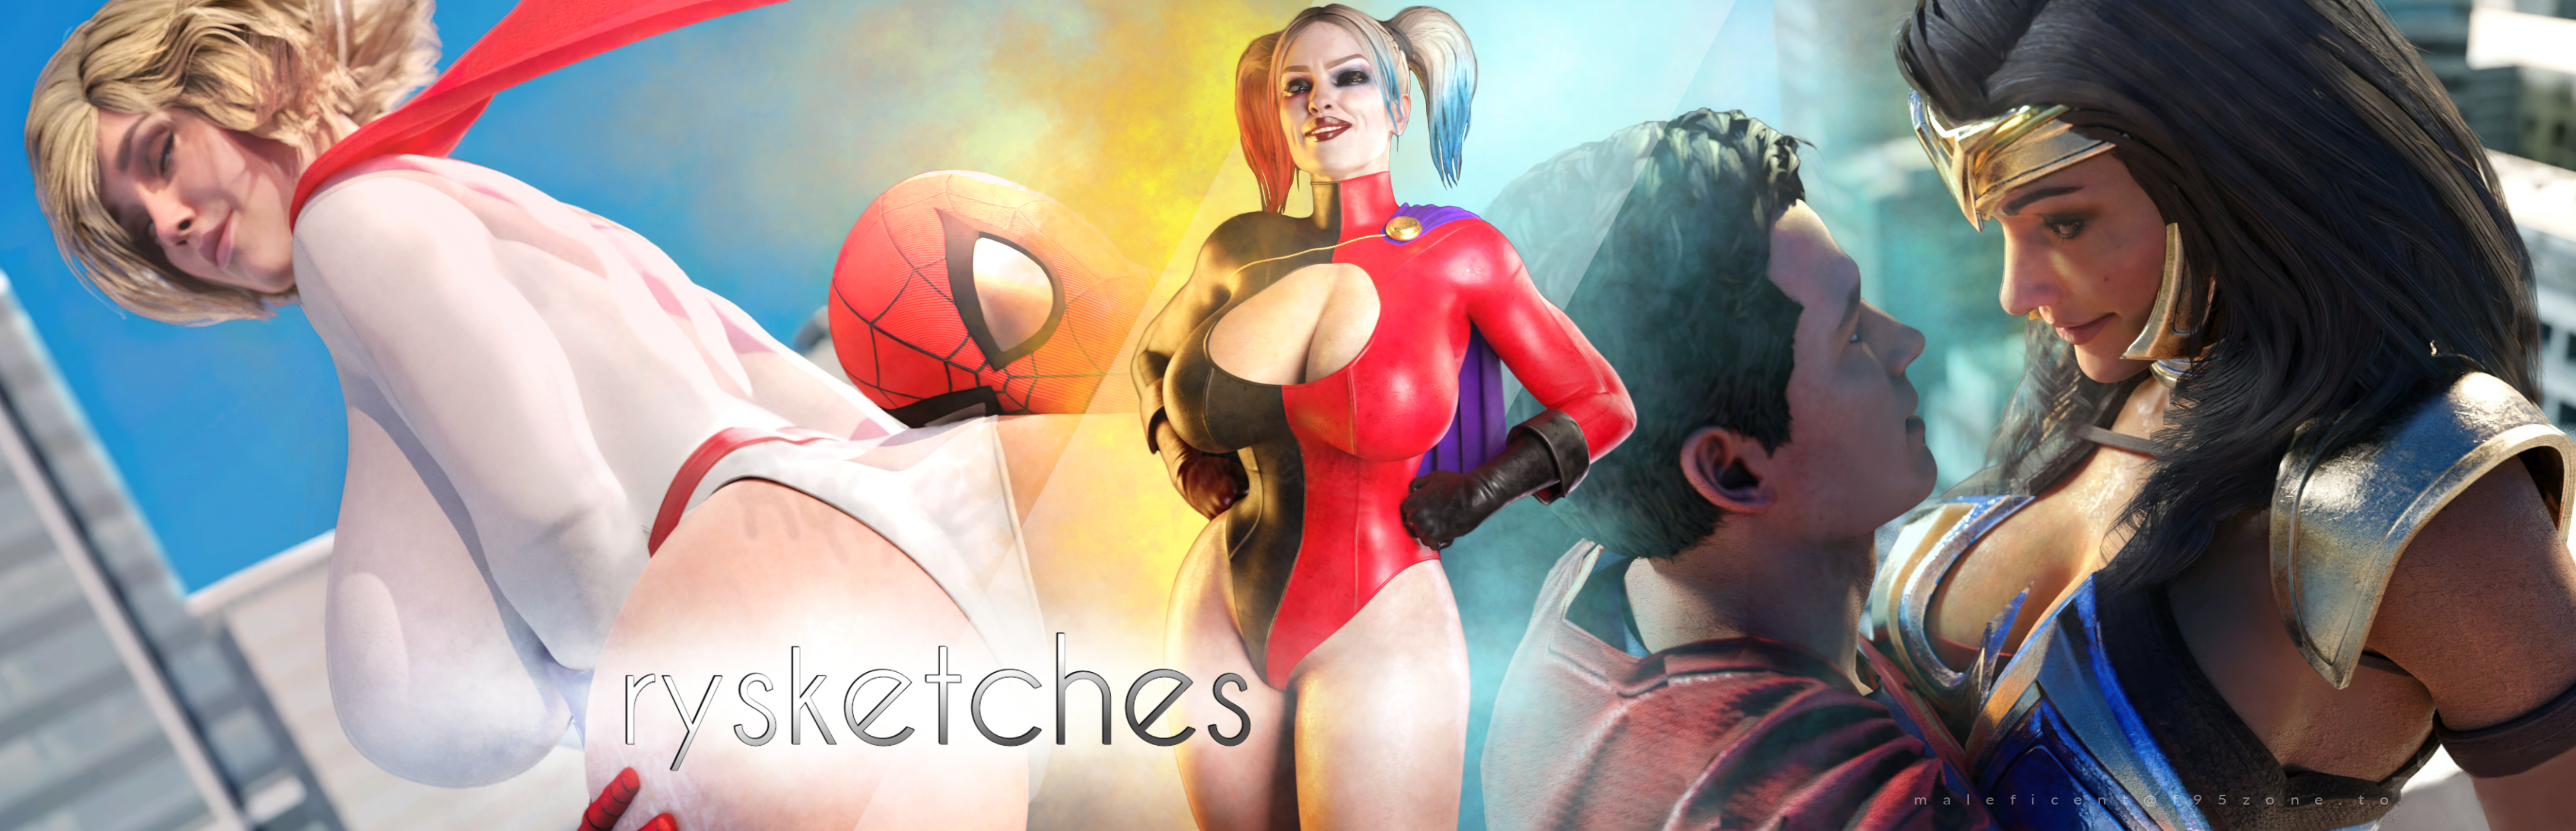 rysketches_custom-cover_by_maleficent.png